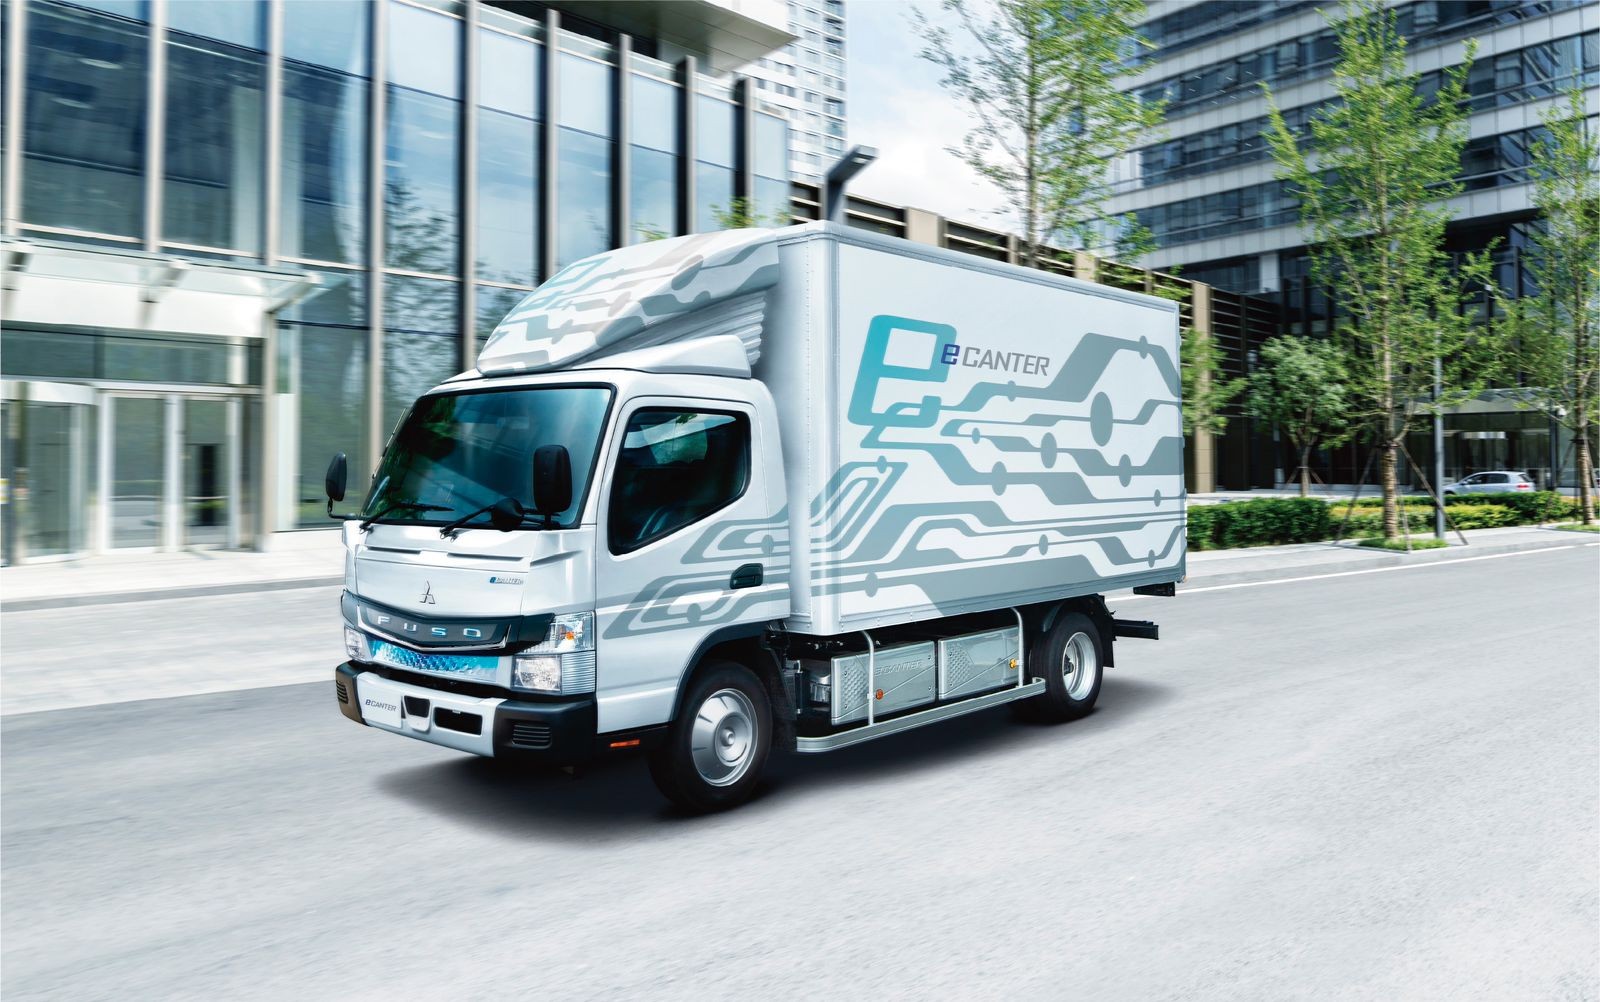 Daimler India Commercial Vehicles (DICV), the wholly-owned subsidiary of Daimler Truck AG (“Daimler Truck”) announced its foray into the Indian battery electric market with the all-electric, Next-Generation eCanter.